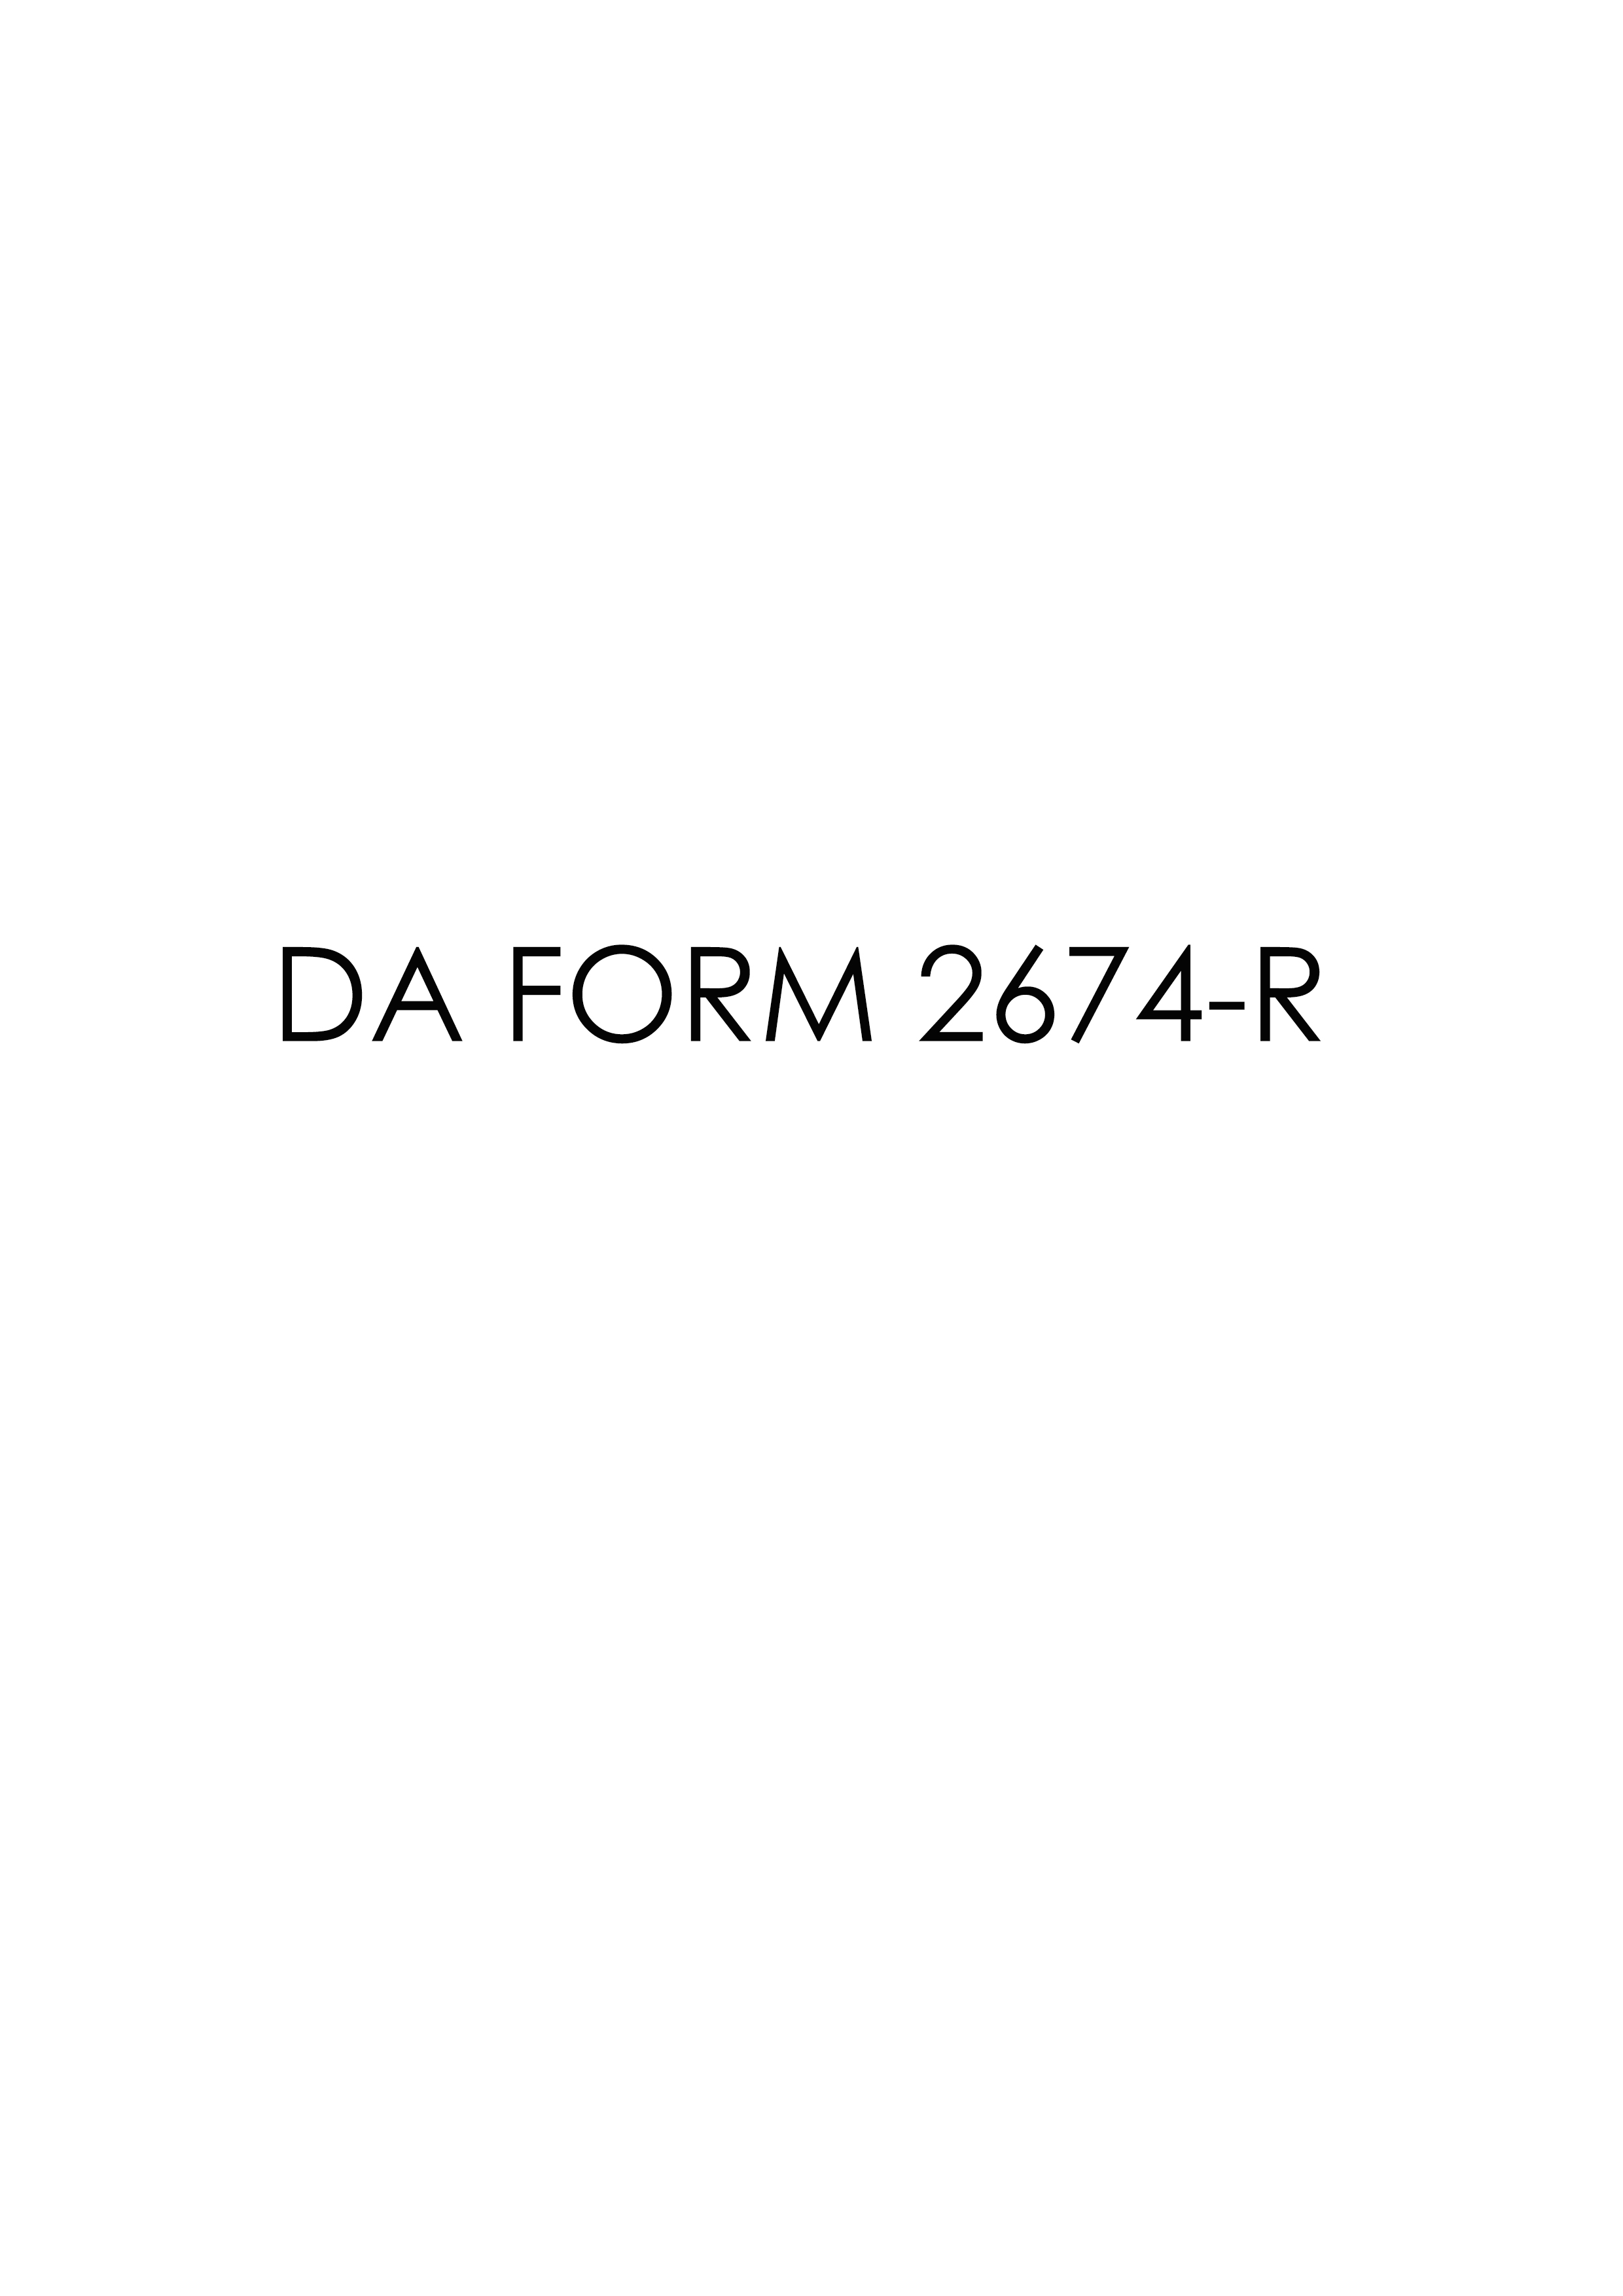 download-fillable-da-form-2674-r-army-myservicesupport